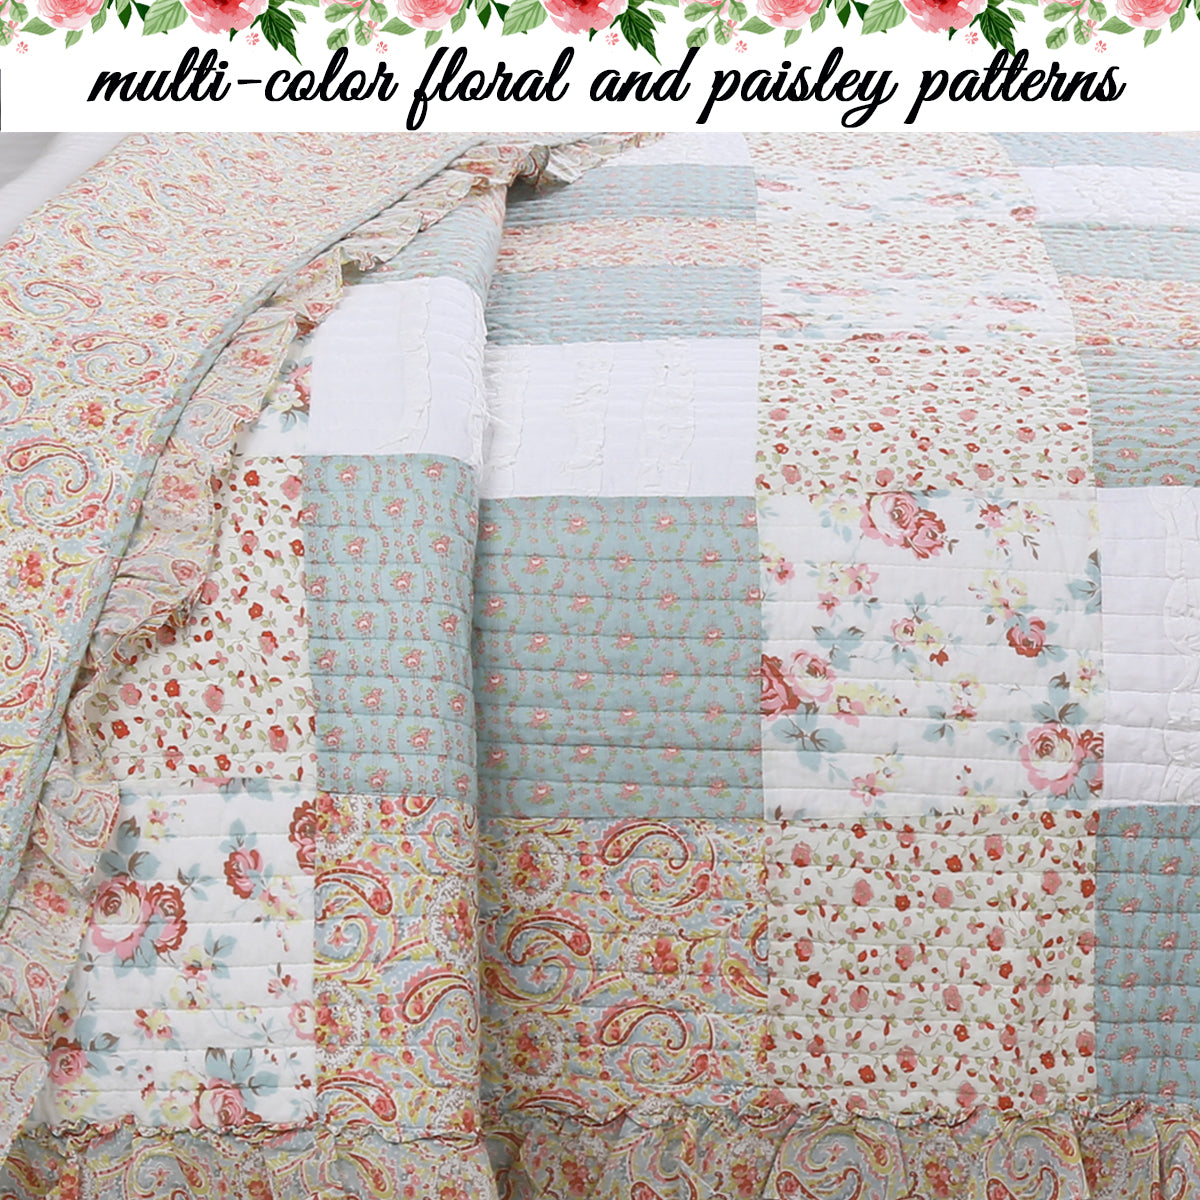 Mucci Floral Ruffle Real Patchwork Cotton 3-Piece Reversible Quilt Bedding Set